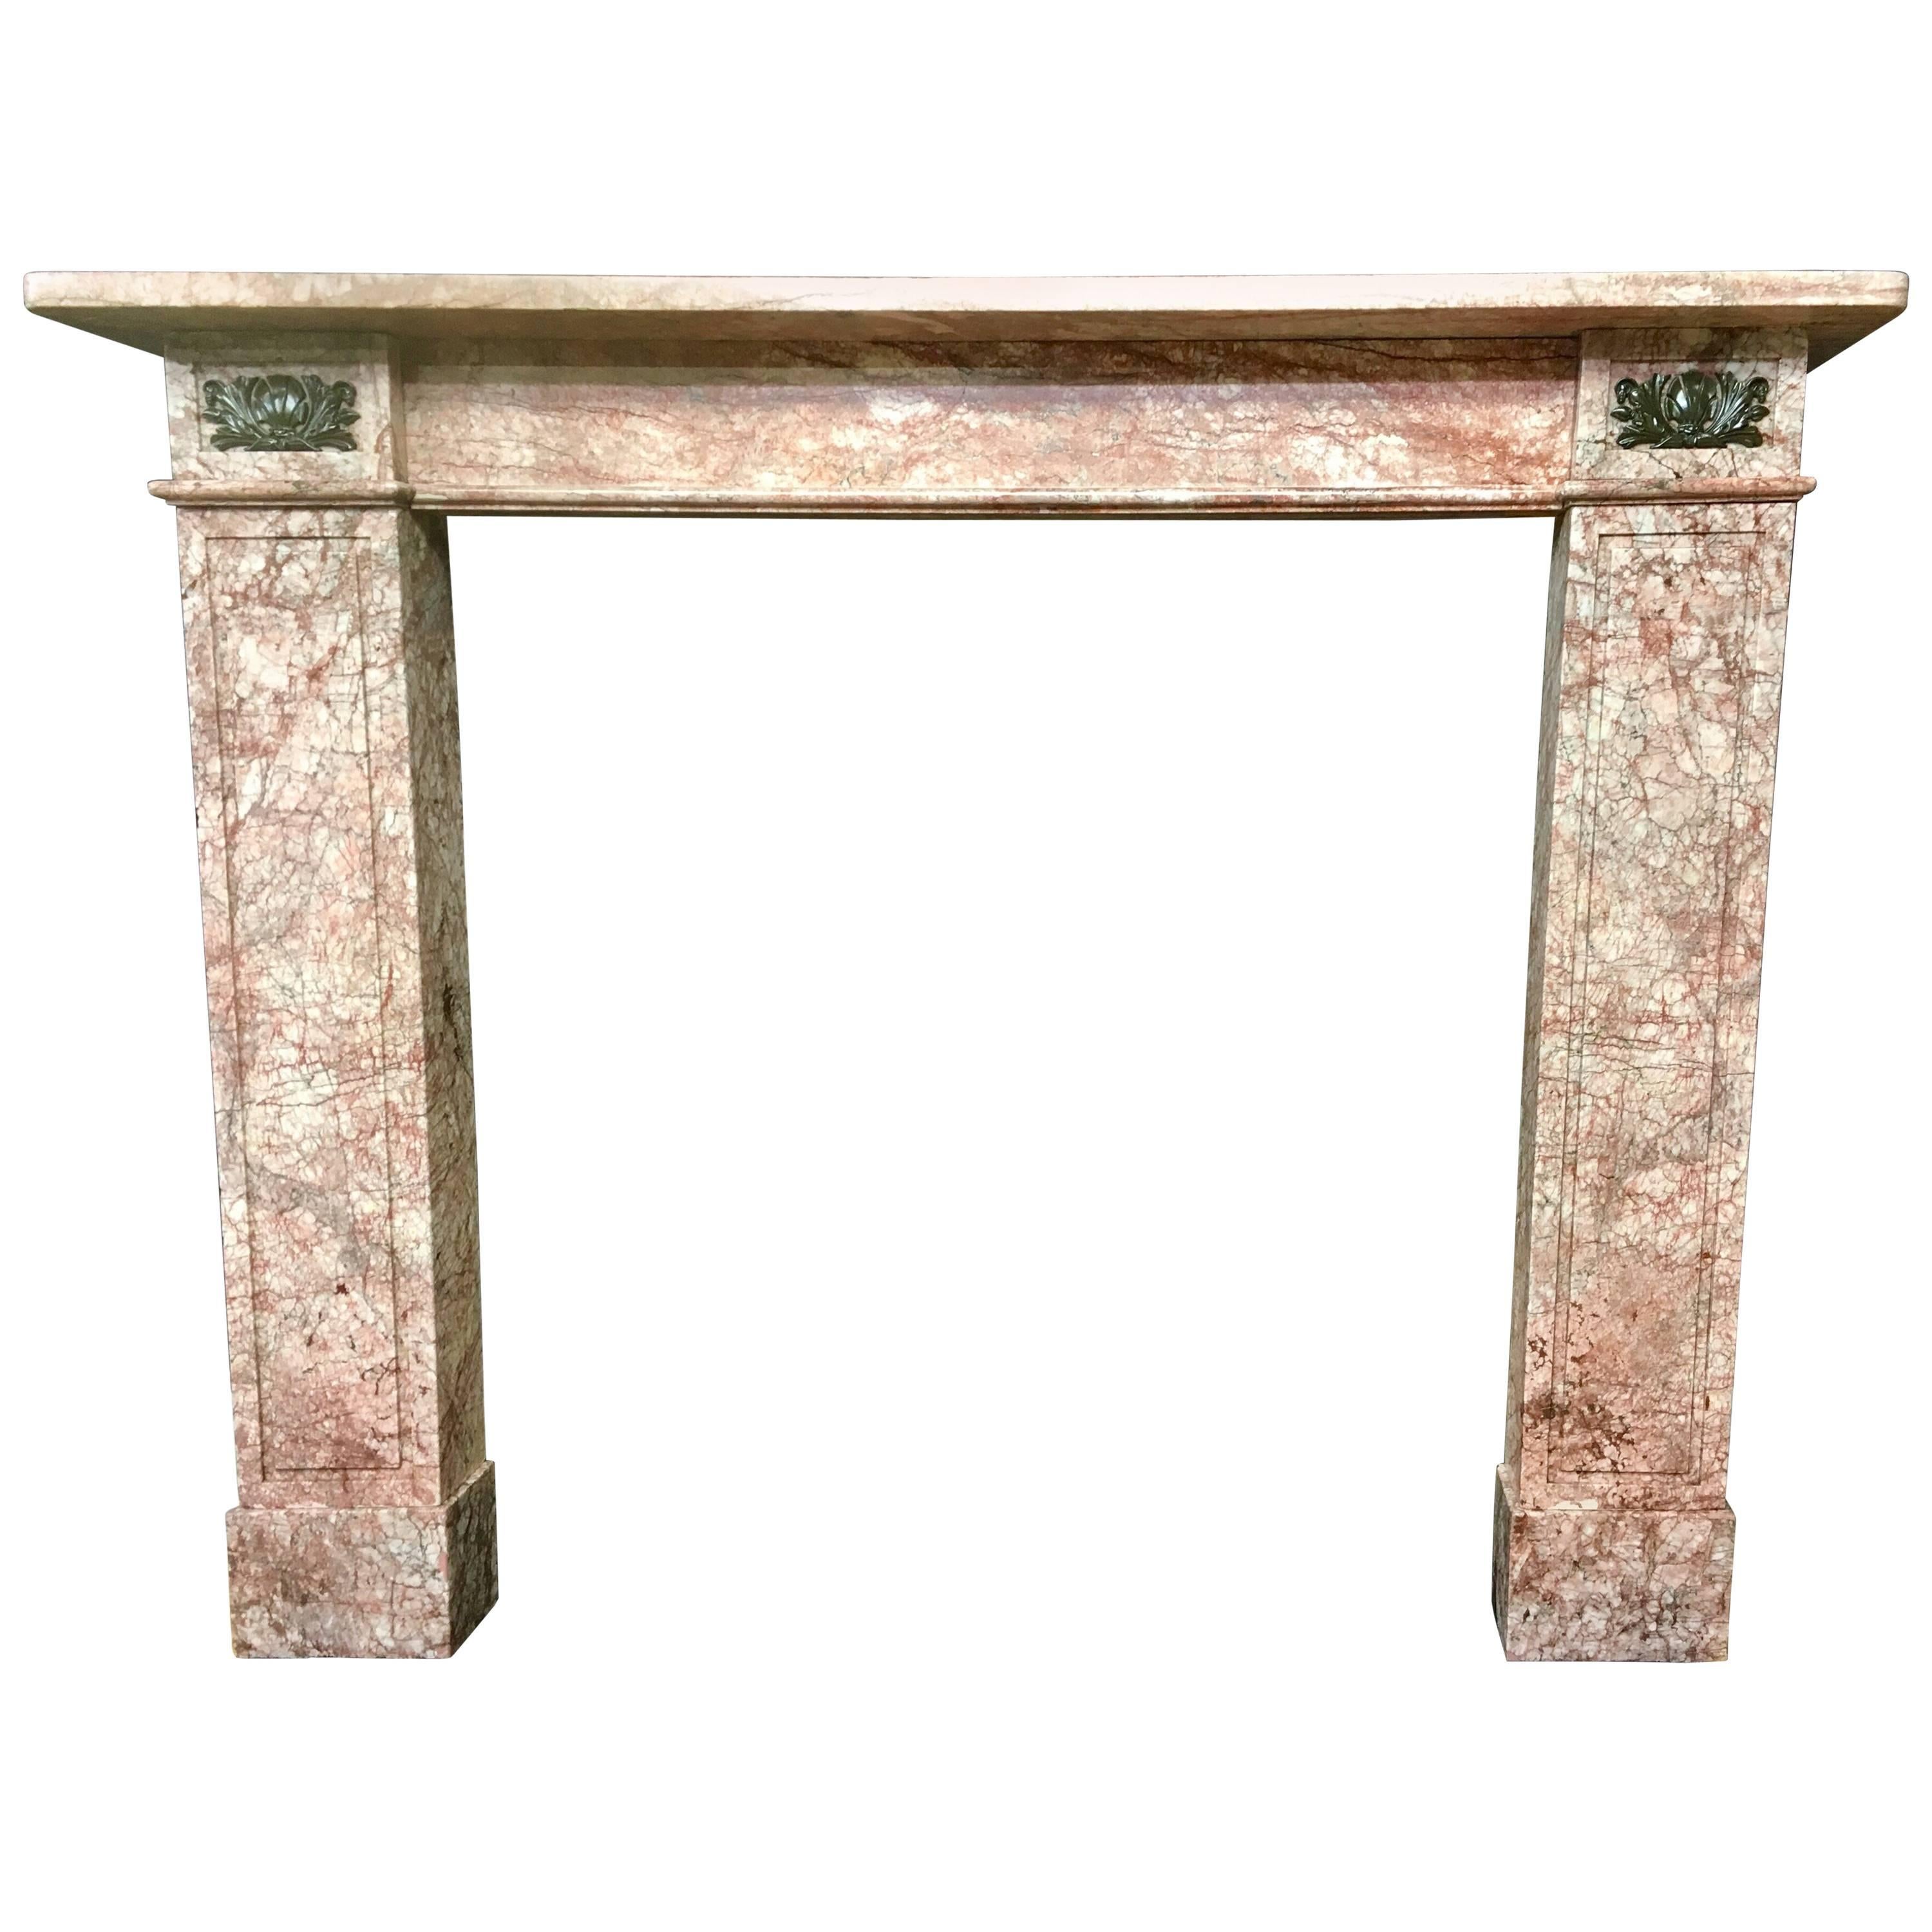 Antique French Empire 19th Century Marble Fireplace Mantel Surround